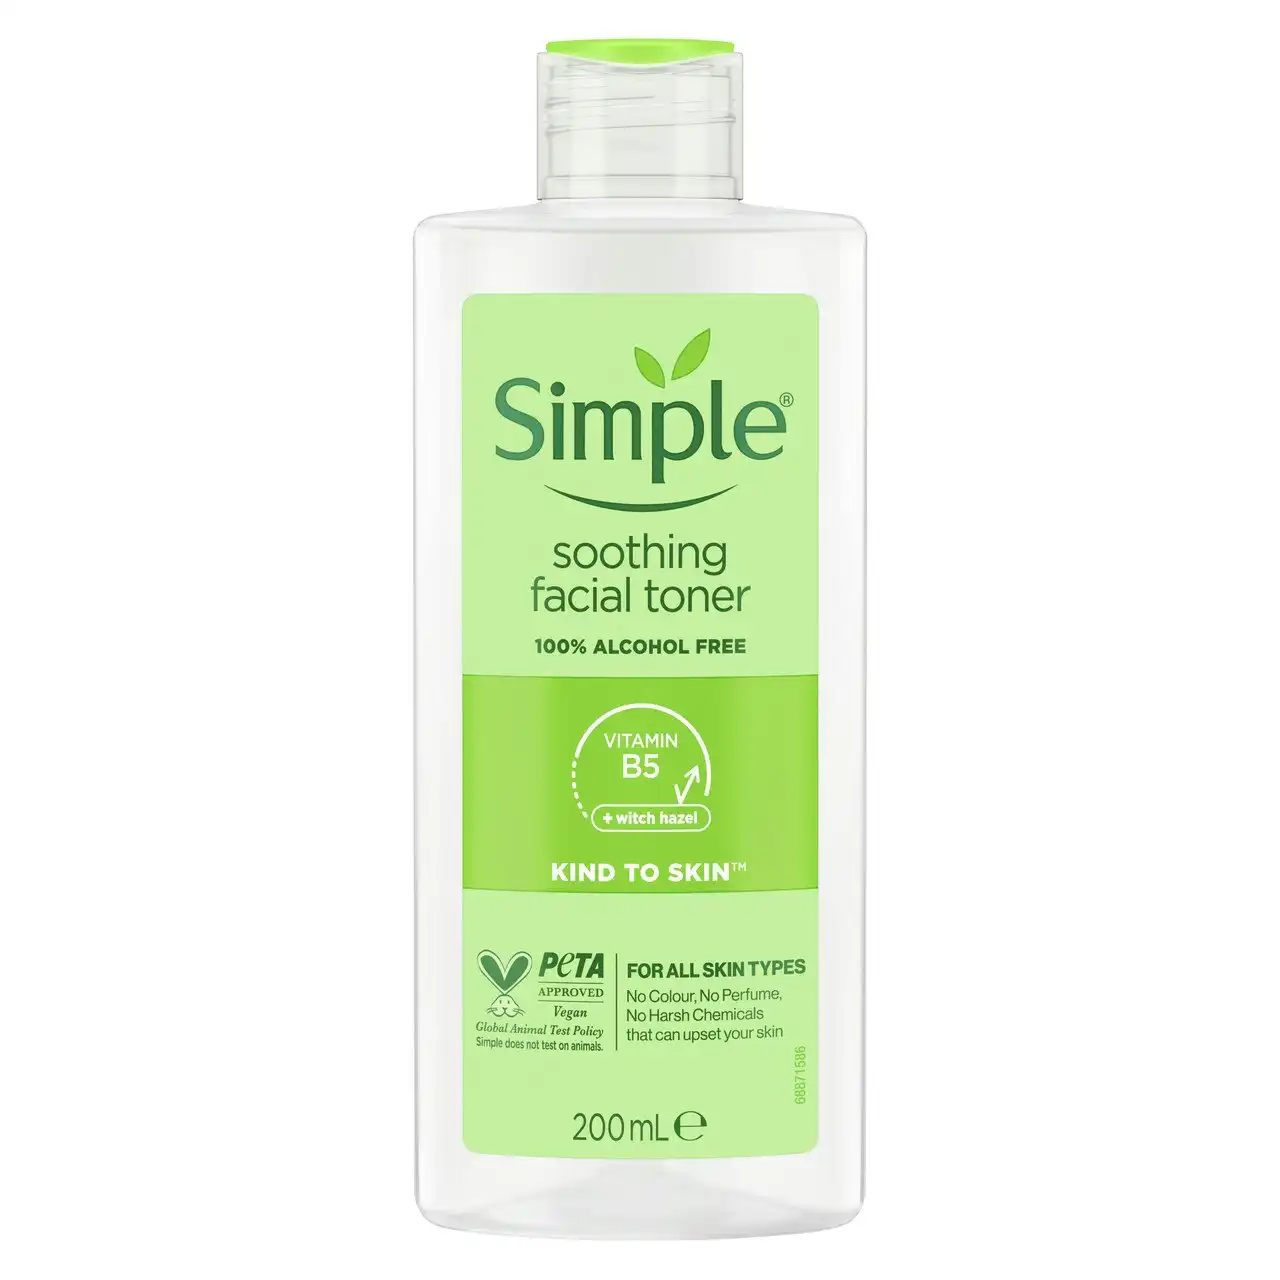 Simple Facial Toner Soothing 200ml